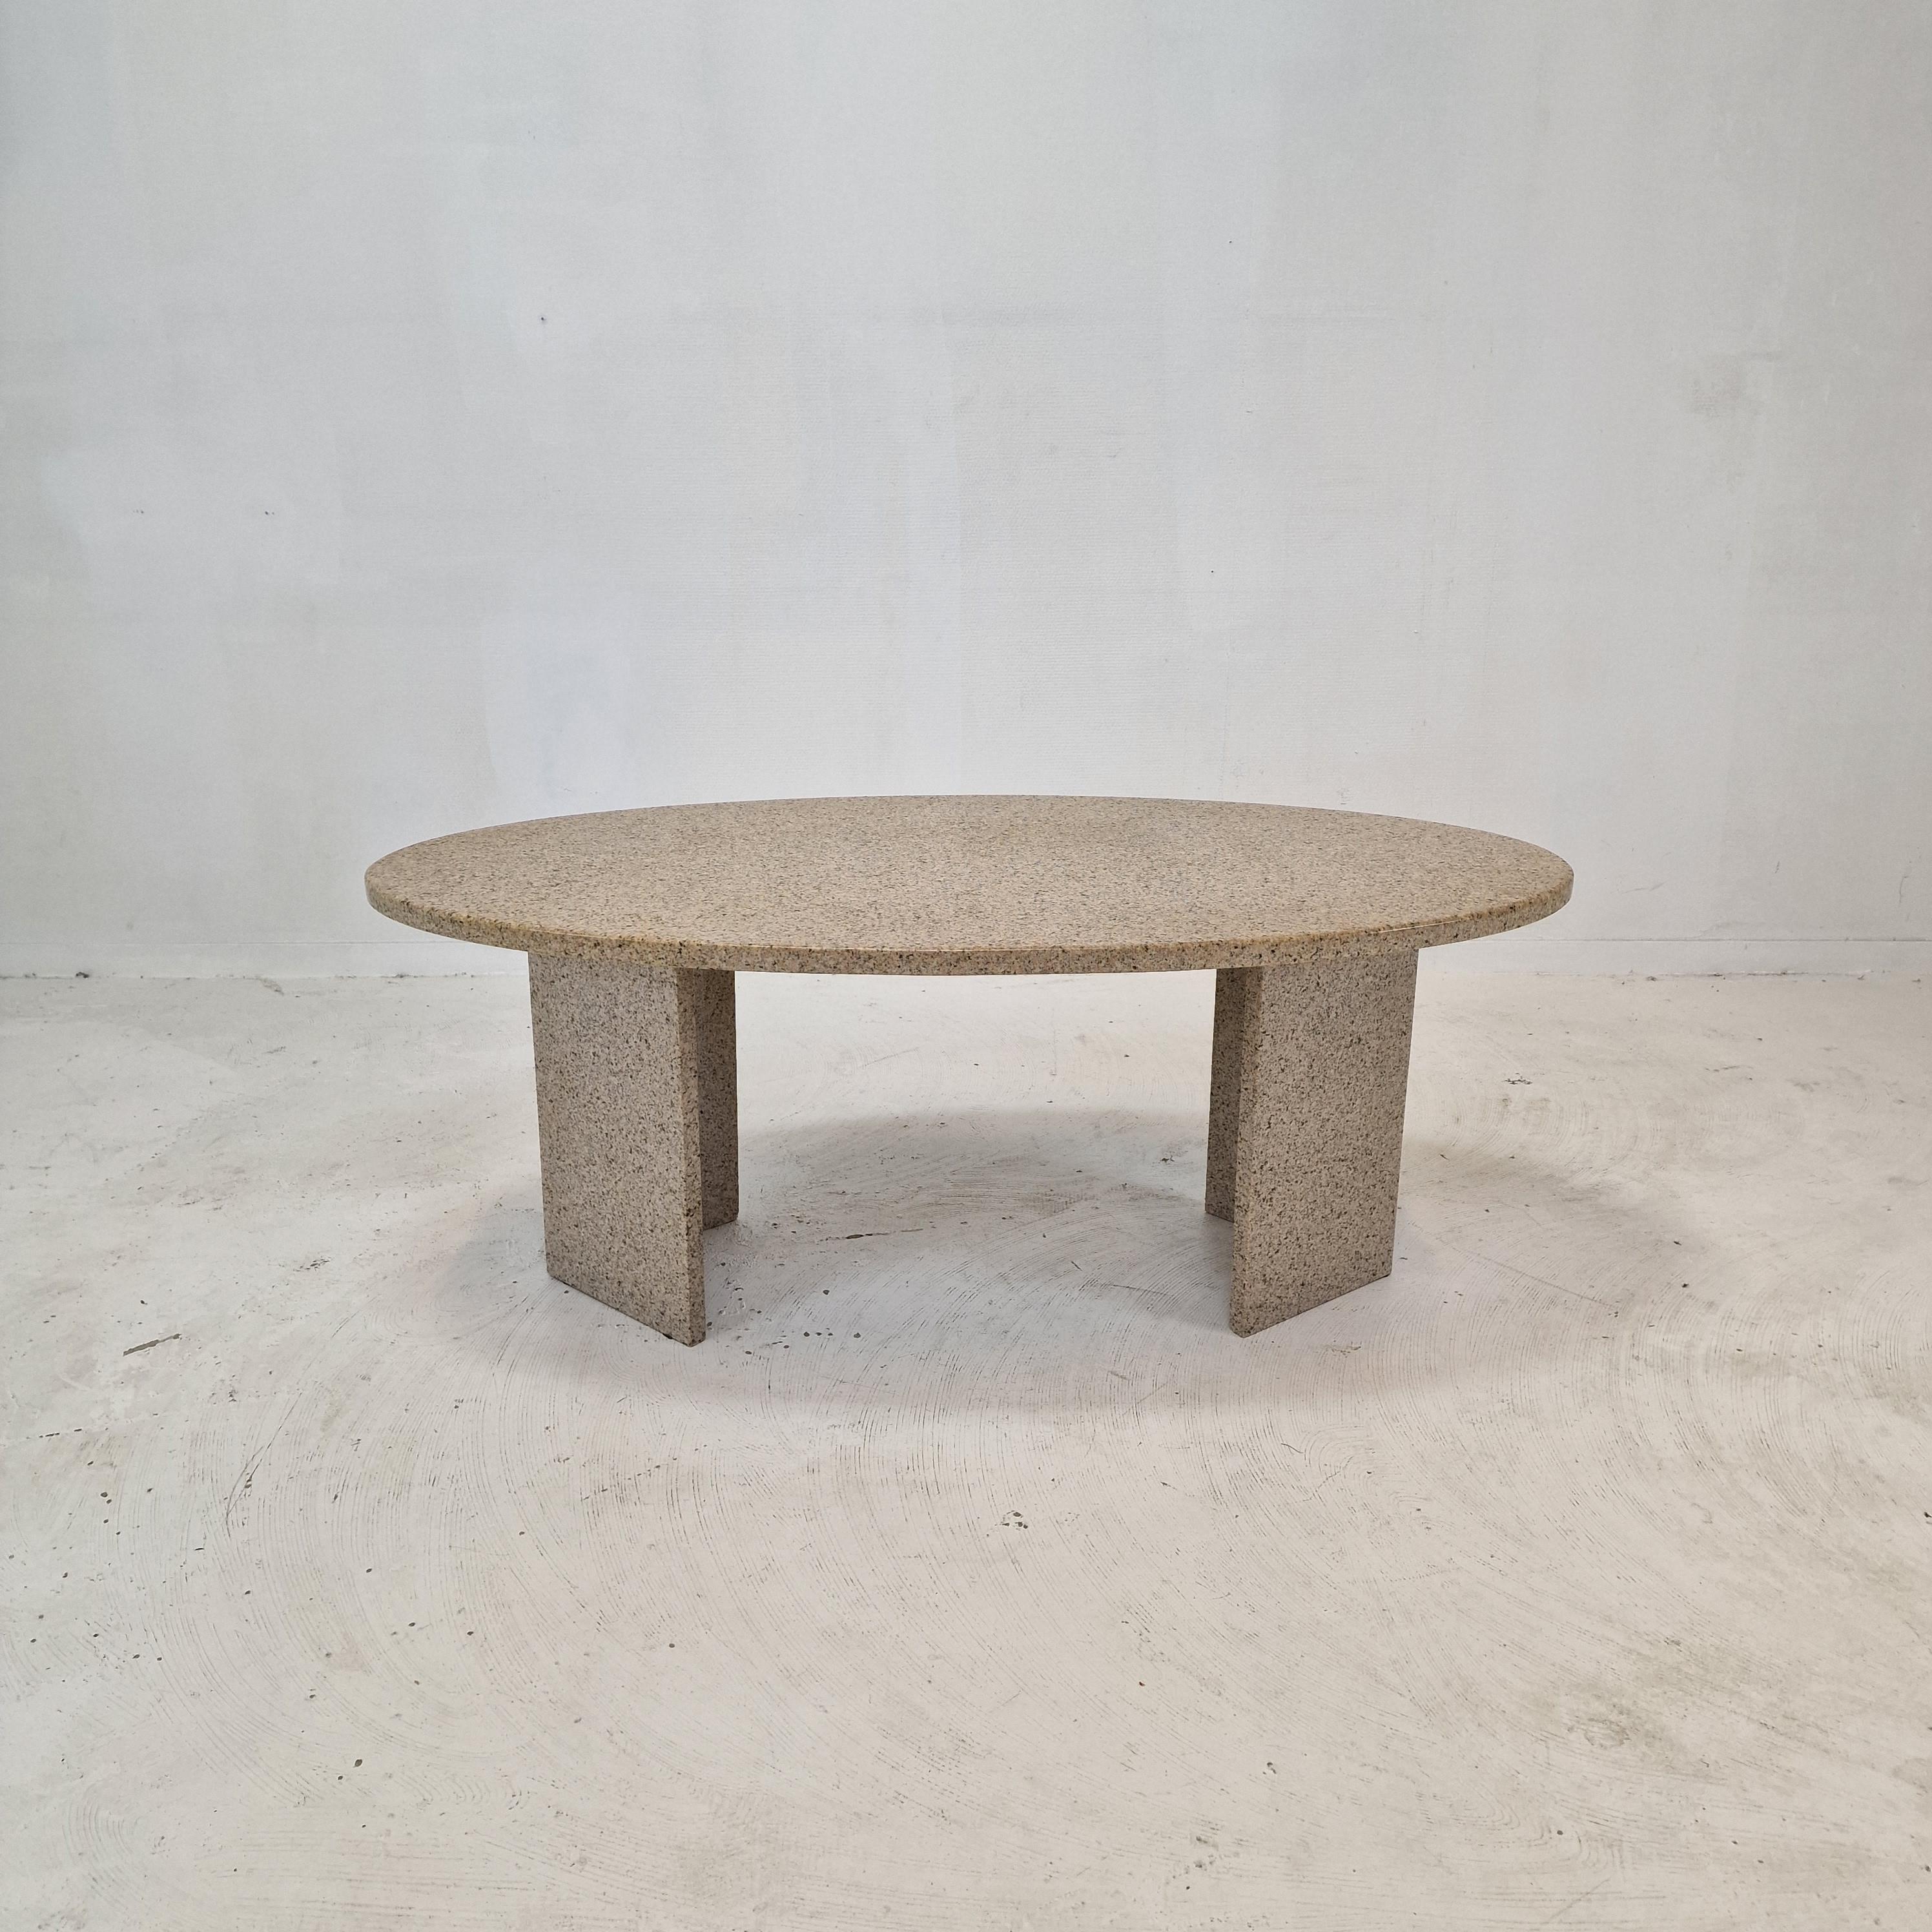 Hand-Crafted Italian Coffee or Side Table in Granite, 1980s For Sale